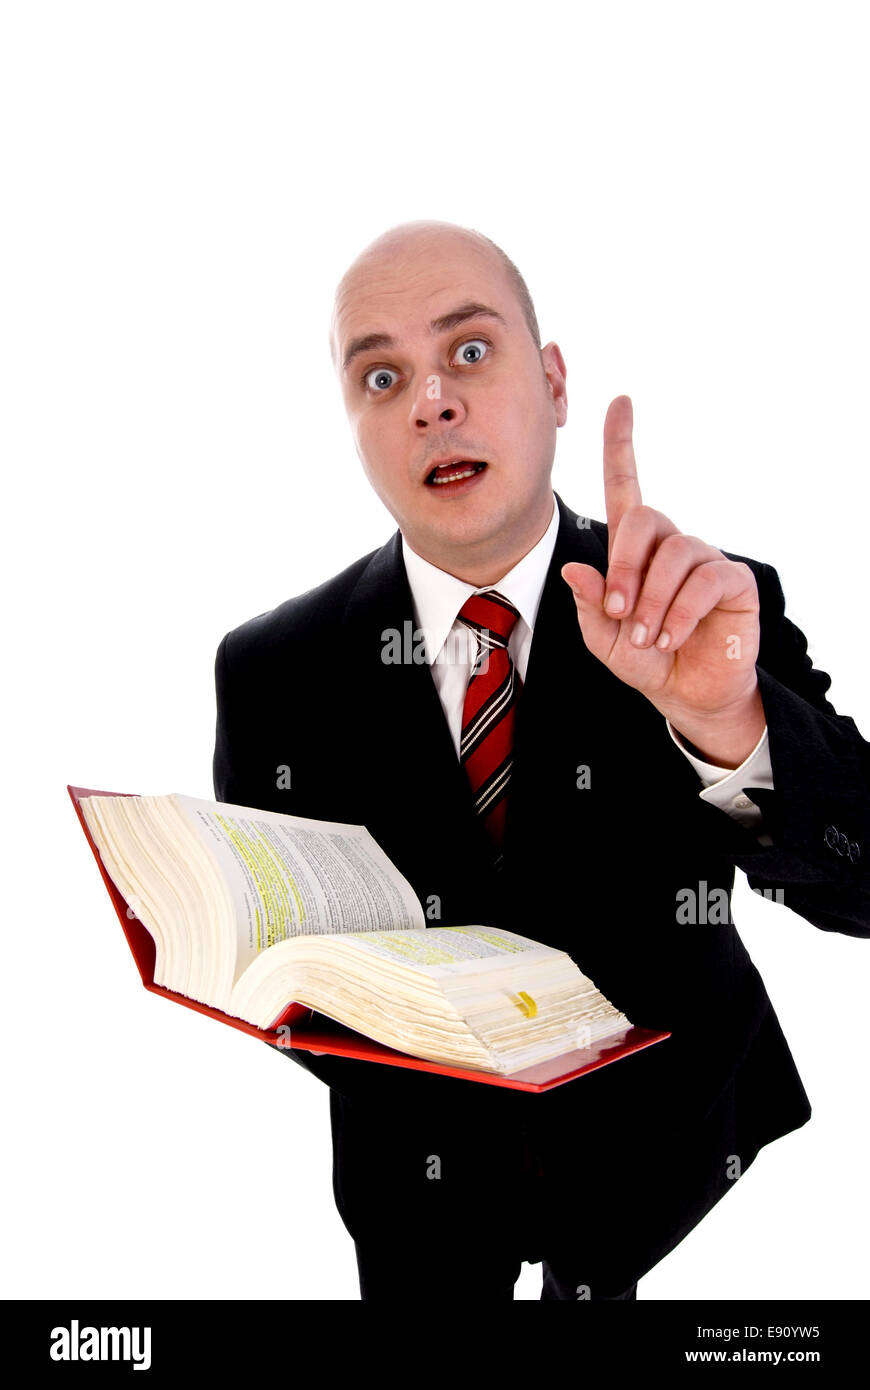 Lawyer with lawbook Stock Photo